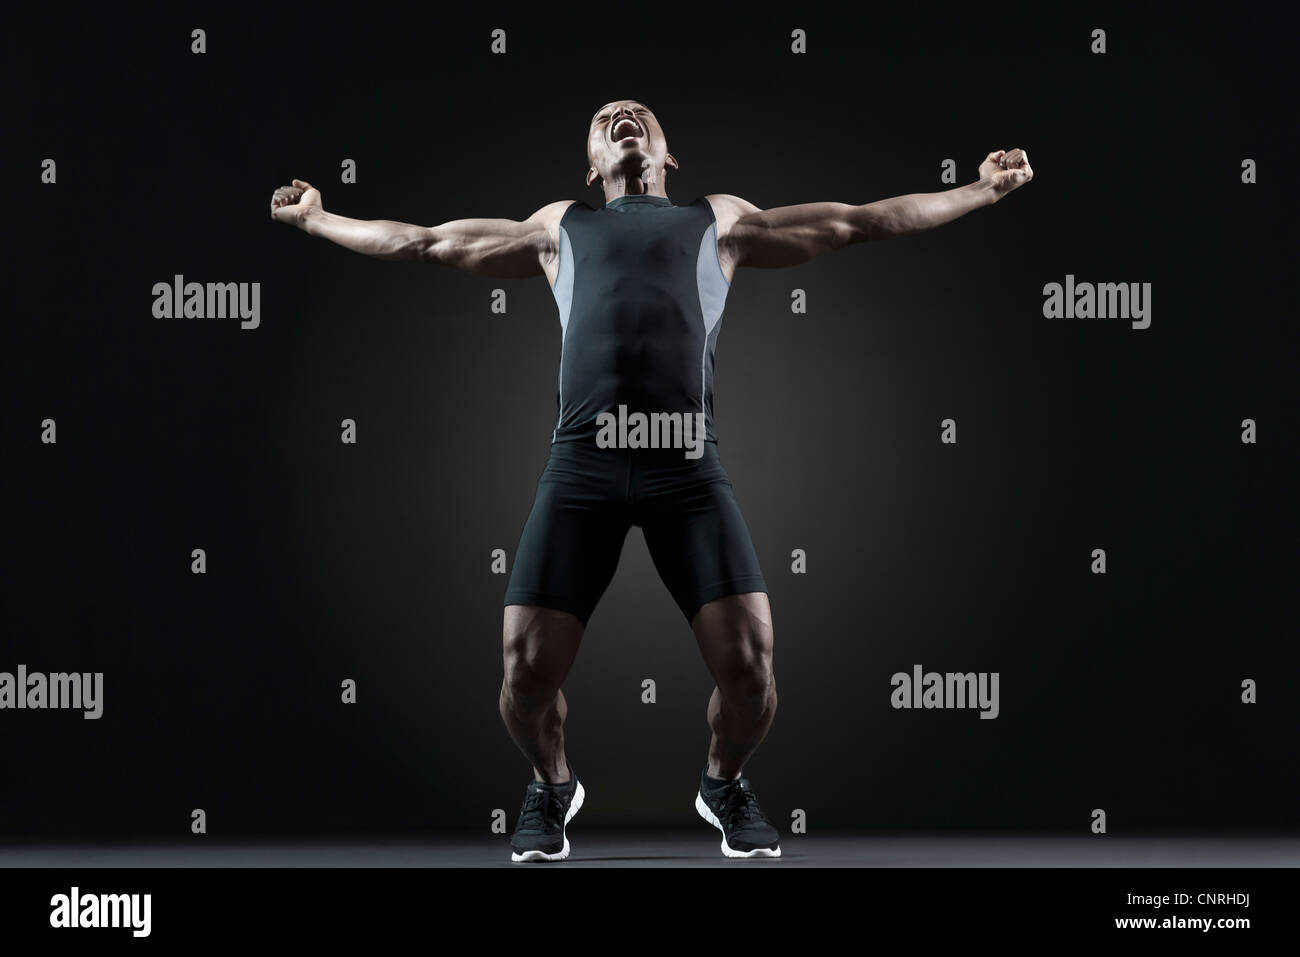 Male athlete shouting with excitement Stock Photo